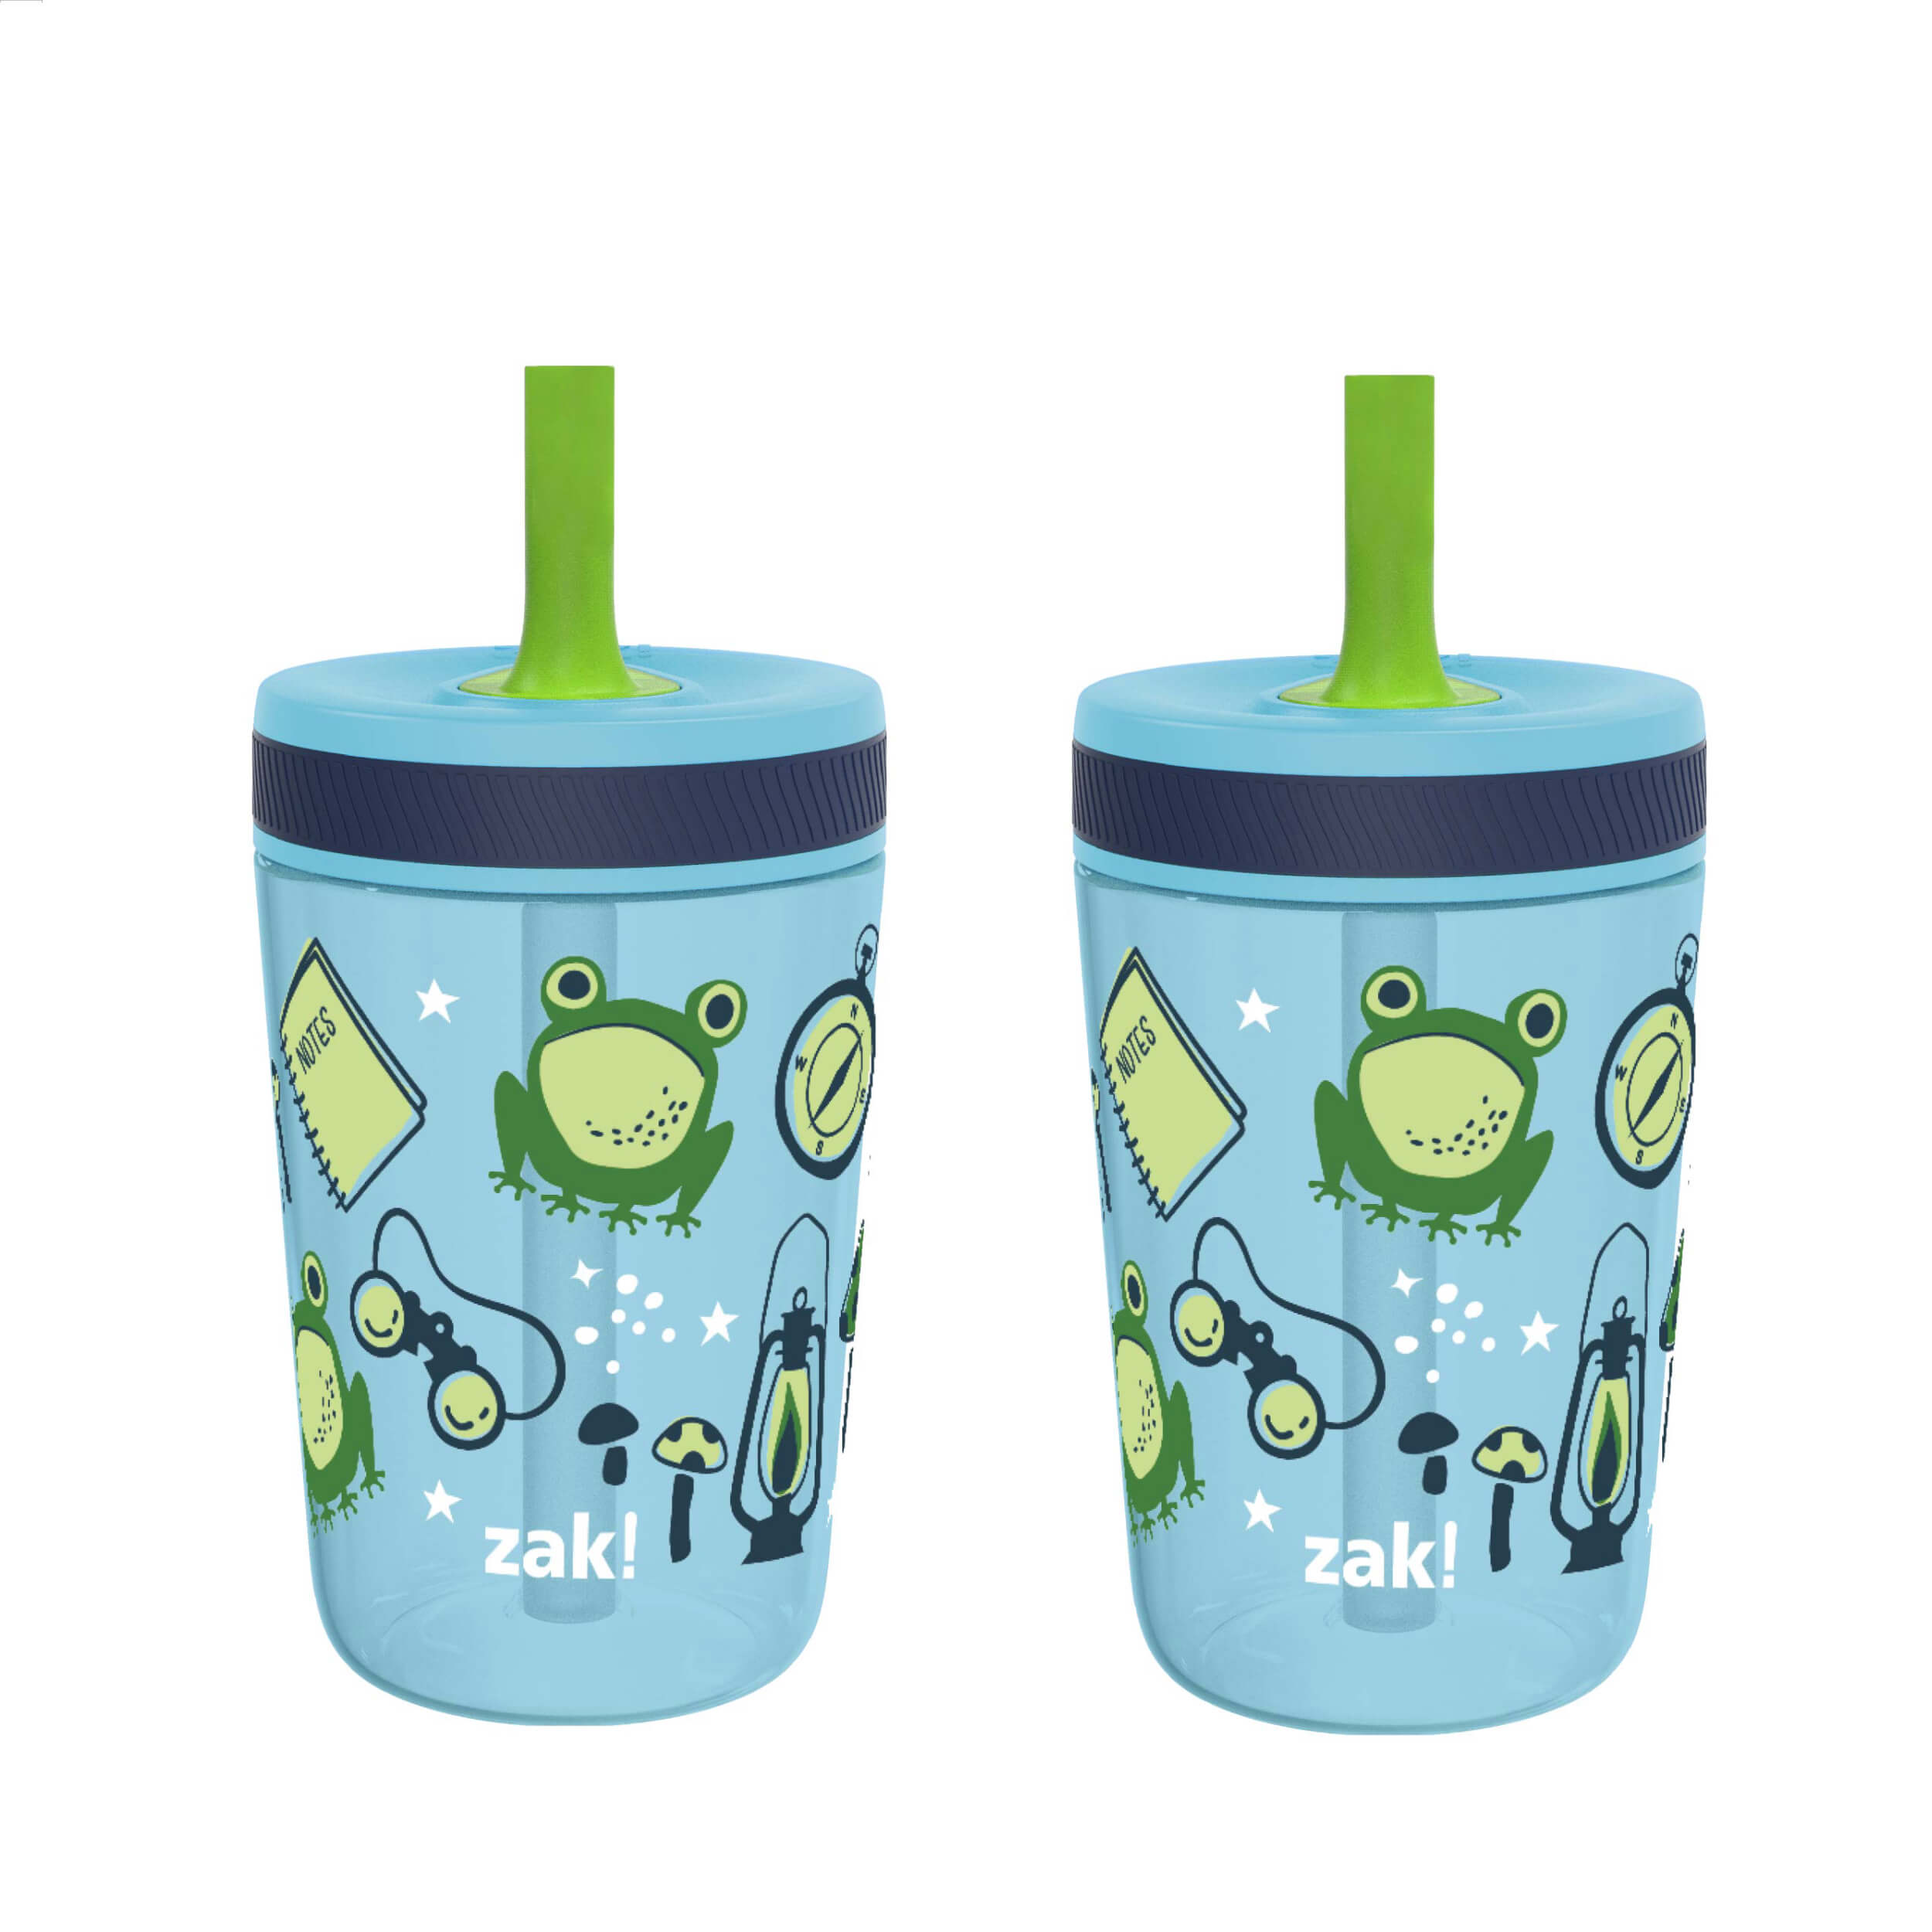 2 oz Kids Tumbler Set, 5 Pack ? Plastic Kids Cups with Straws and Lids